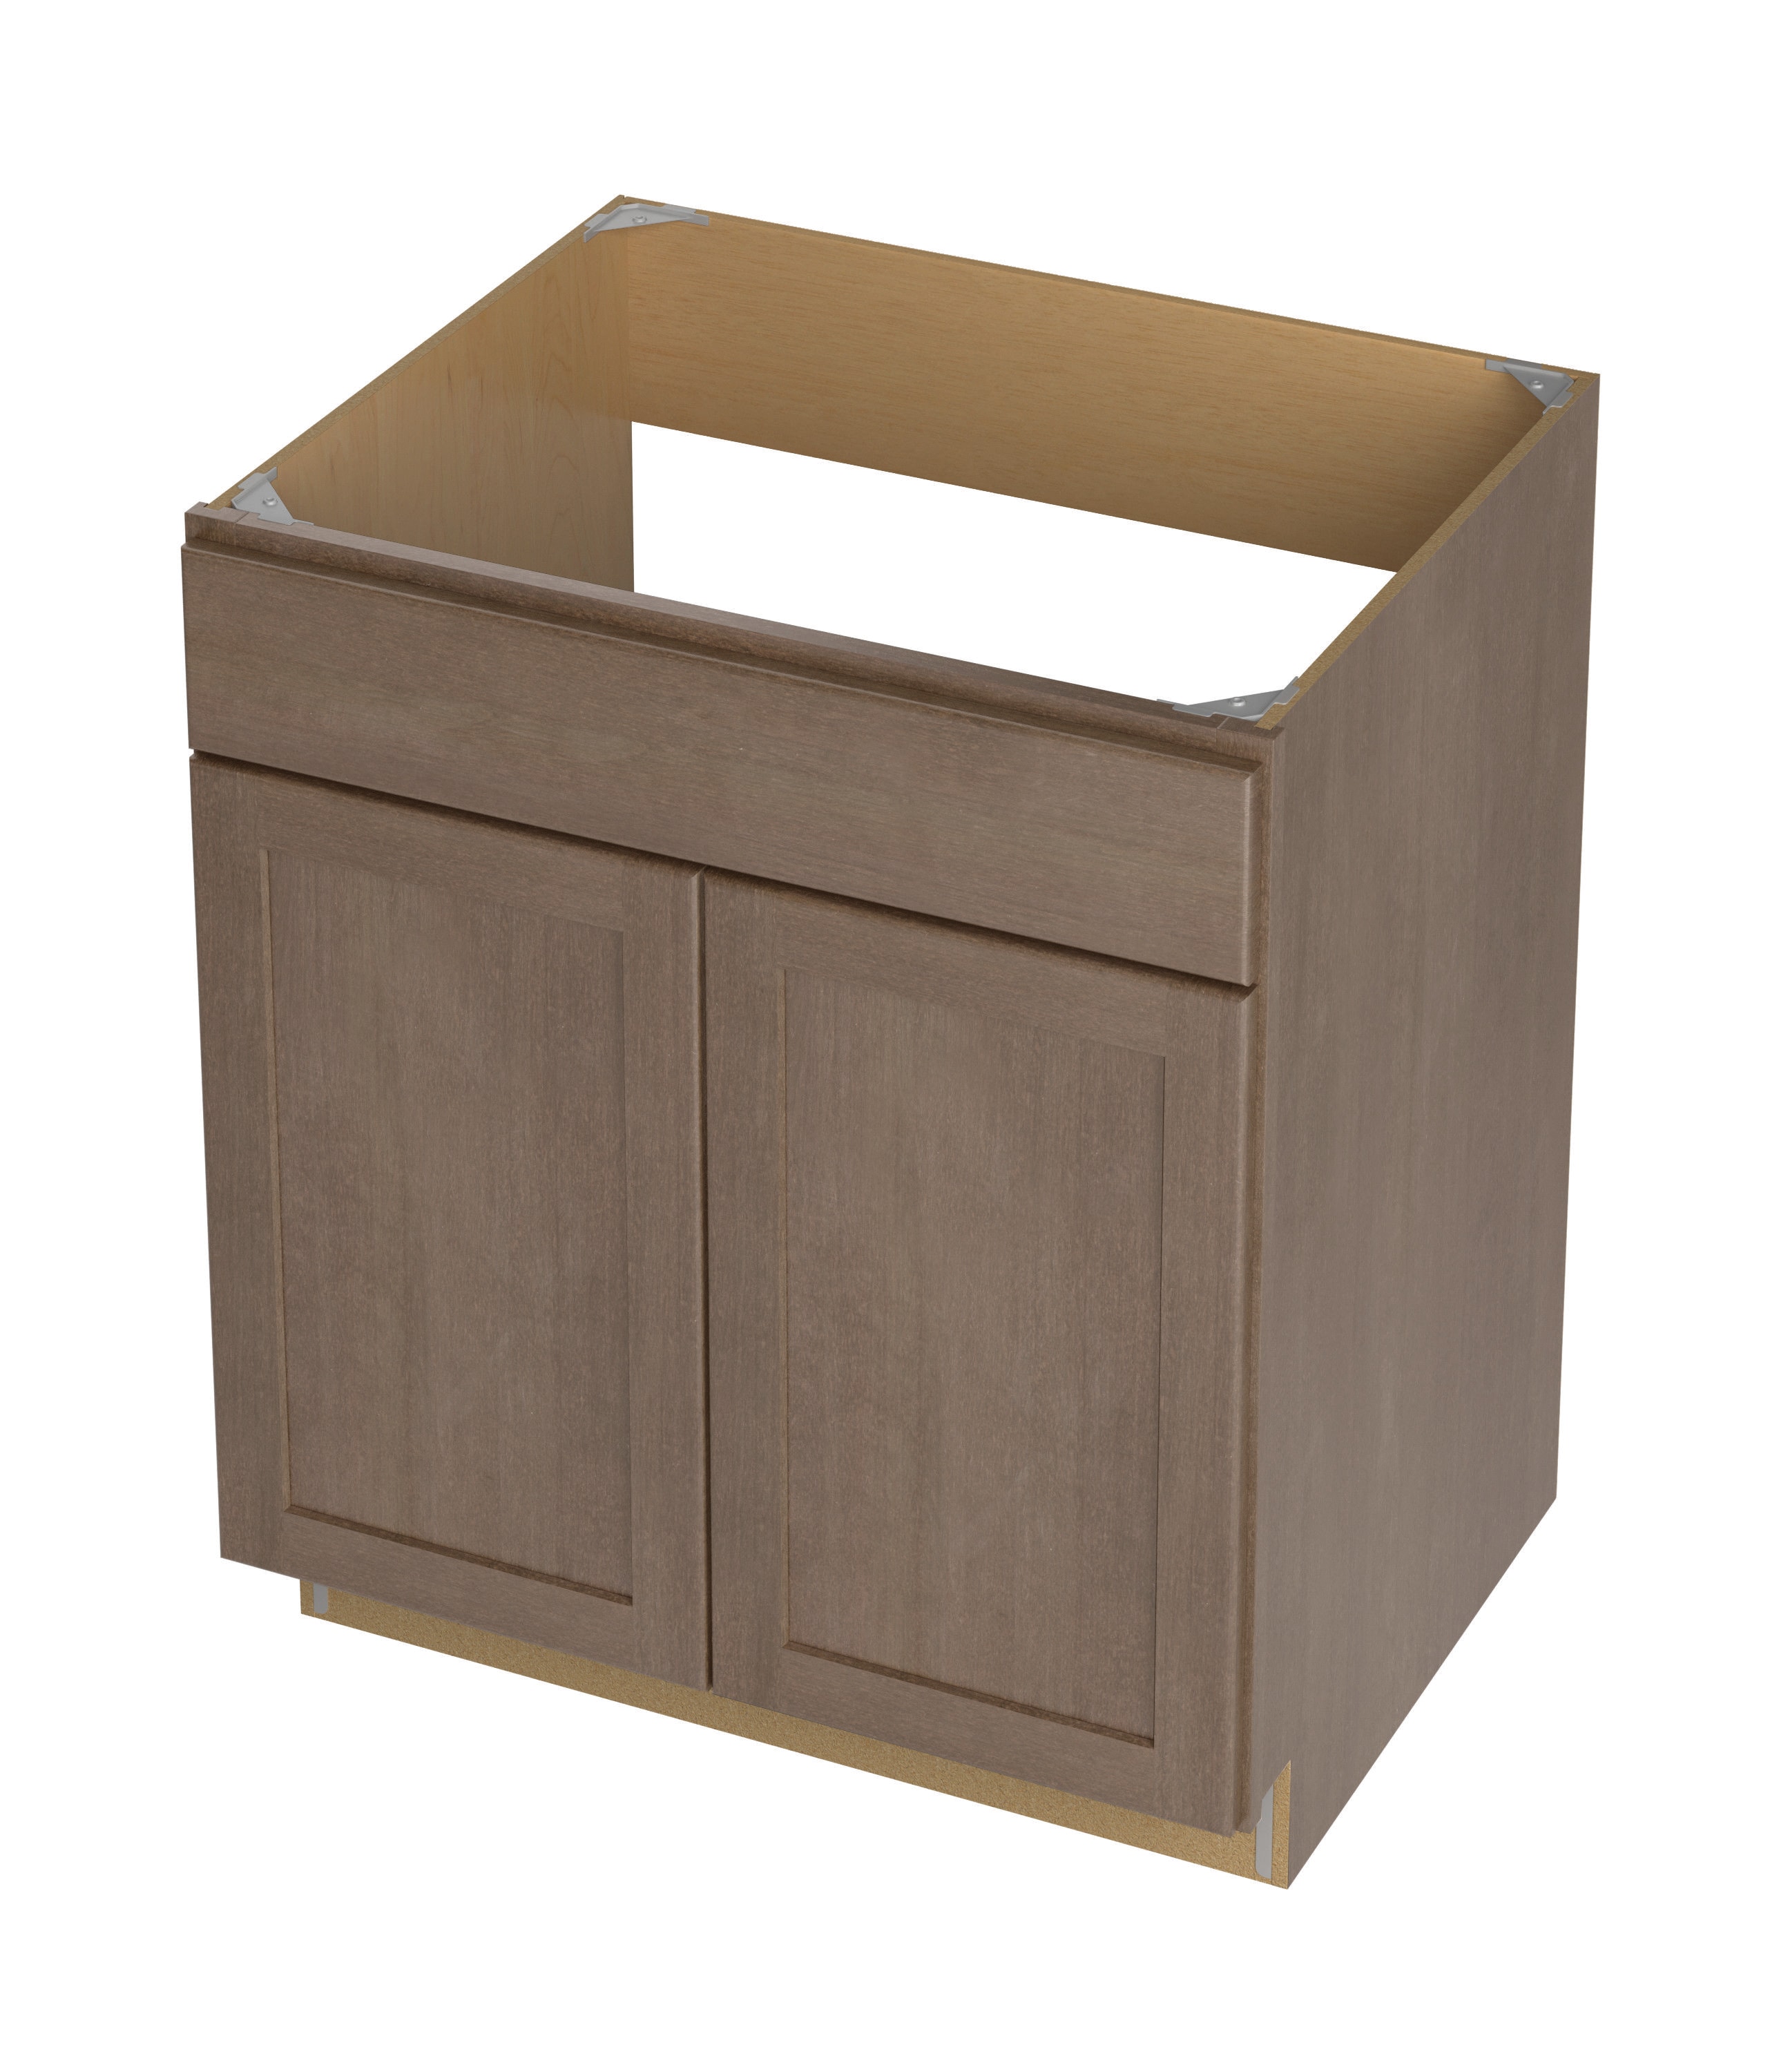 KCD-LV-SB36-PA - KCD - Lenox Canvas - 36 Sink Base Cabinet - Preassembled  - Discount Custom Cabinets